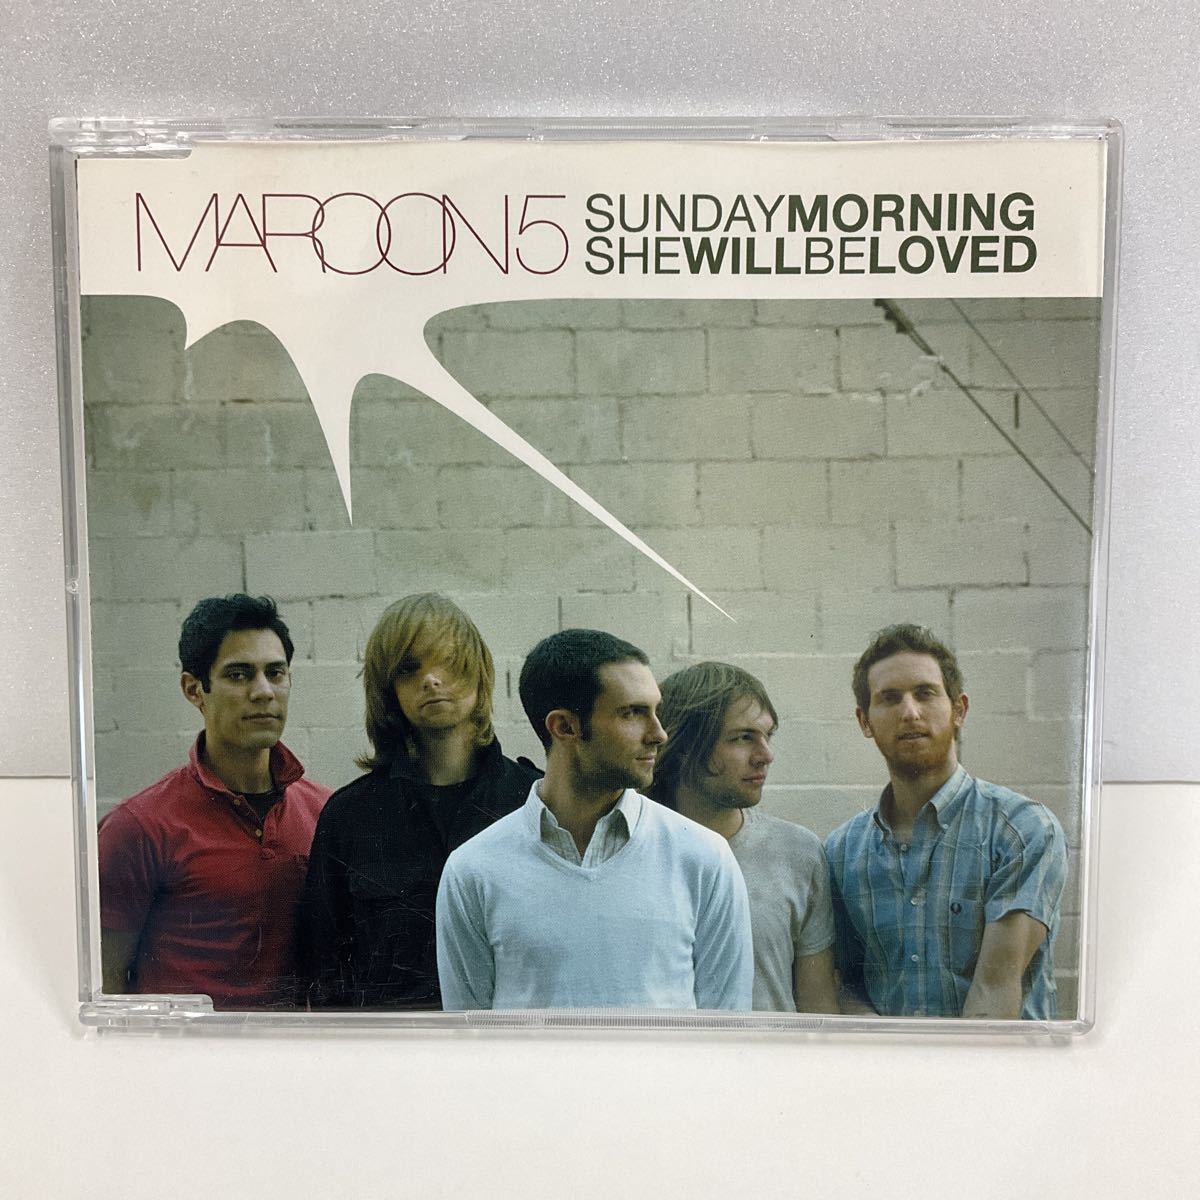 CDシングル / MAROON 5 / SUNDAY MORNING / SHE WILL BE LOVED / 輸入盤 / TV TRACK VER.収録_画像1